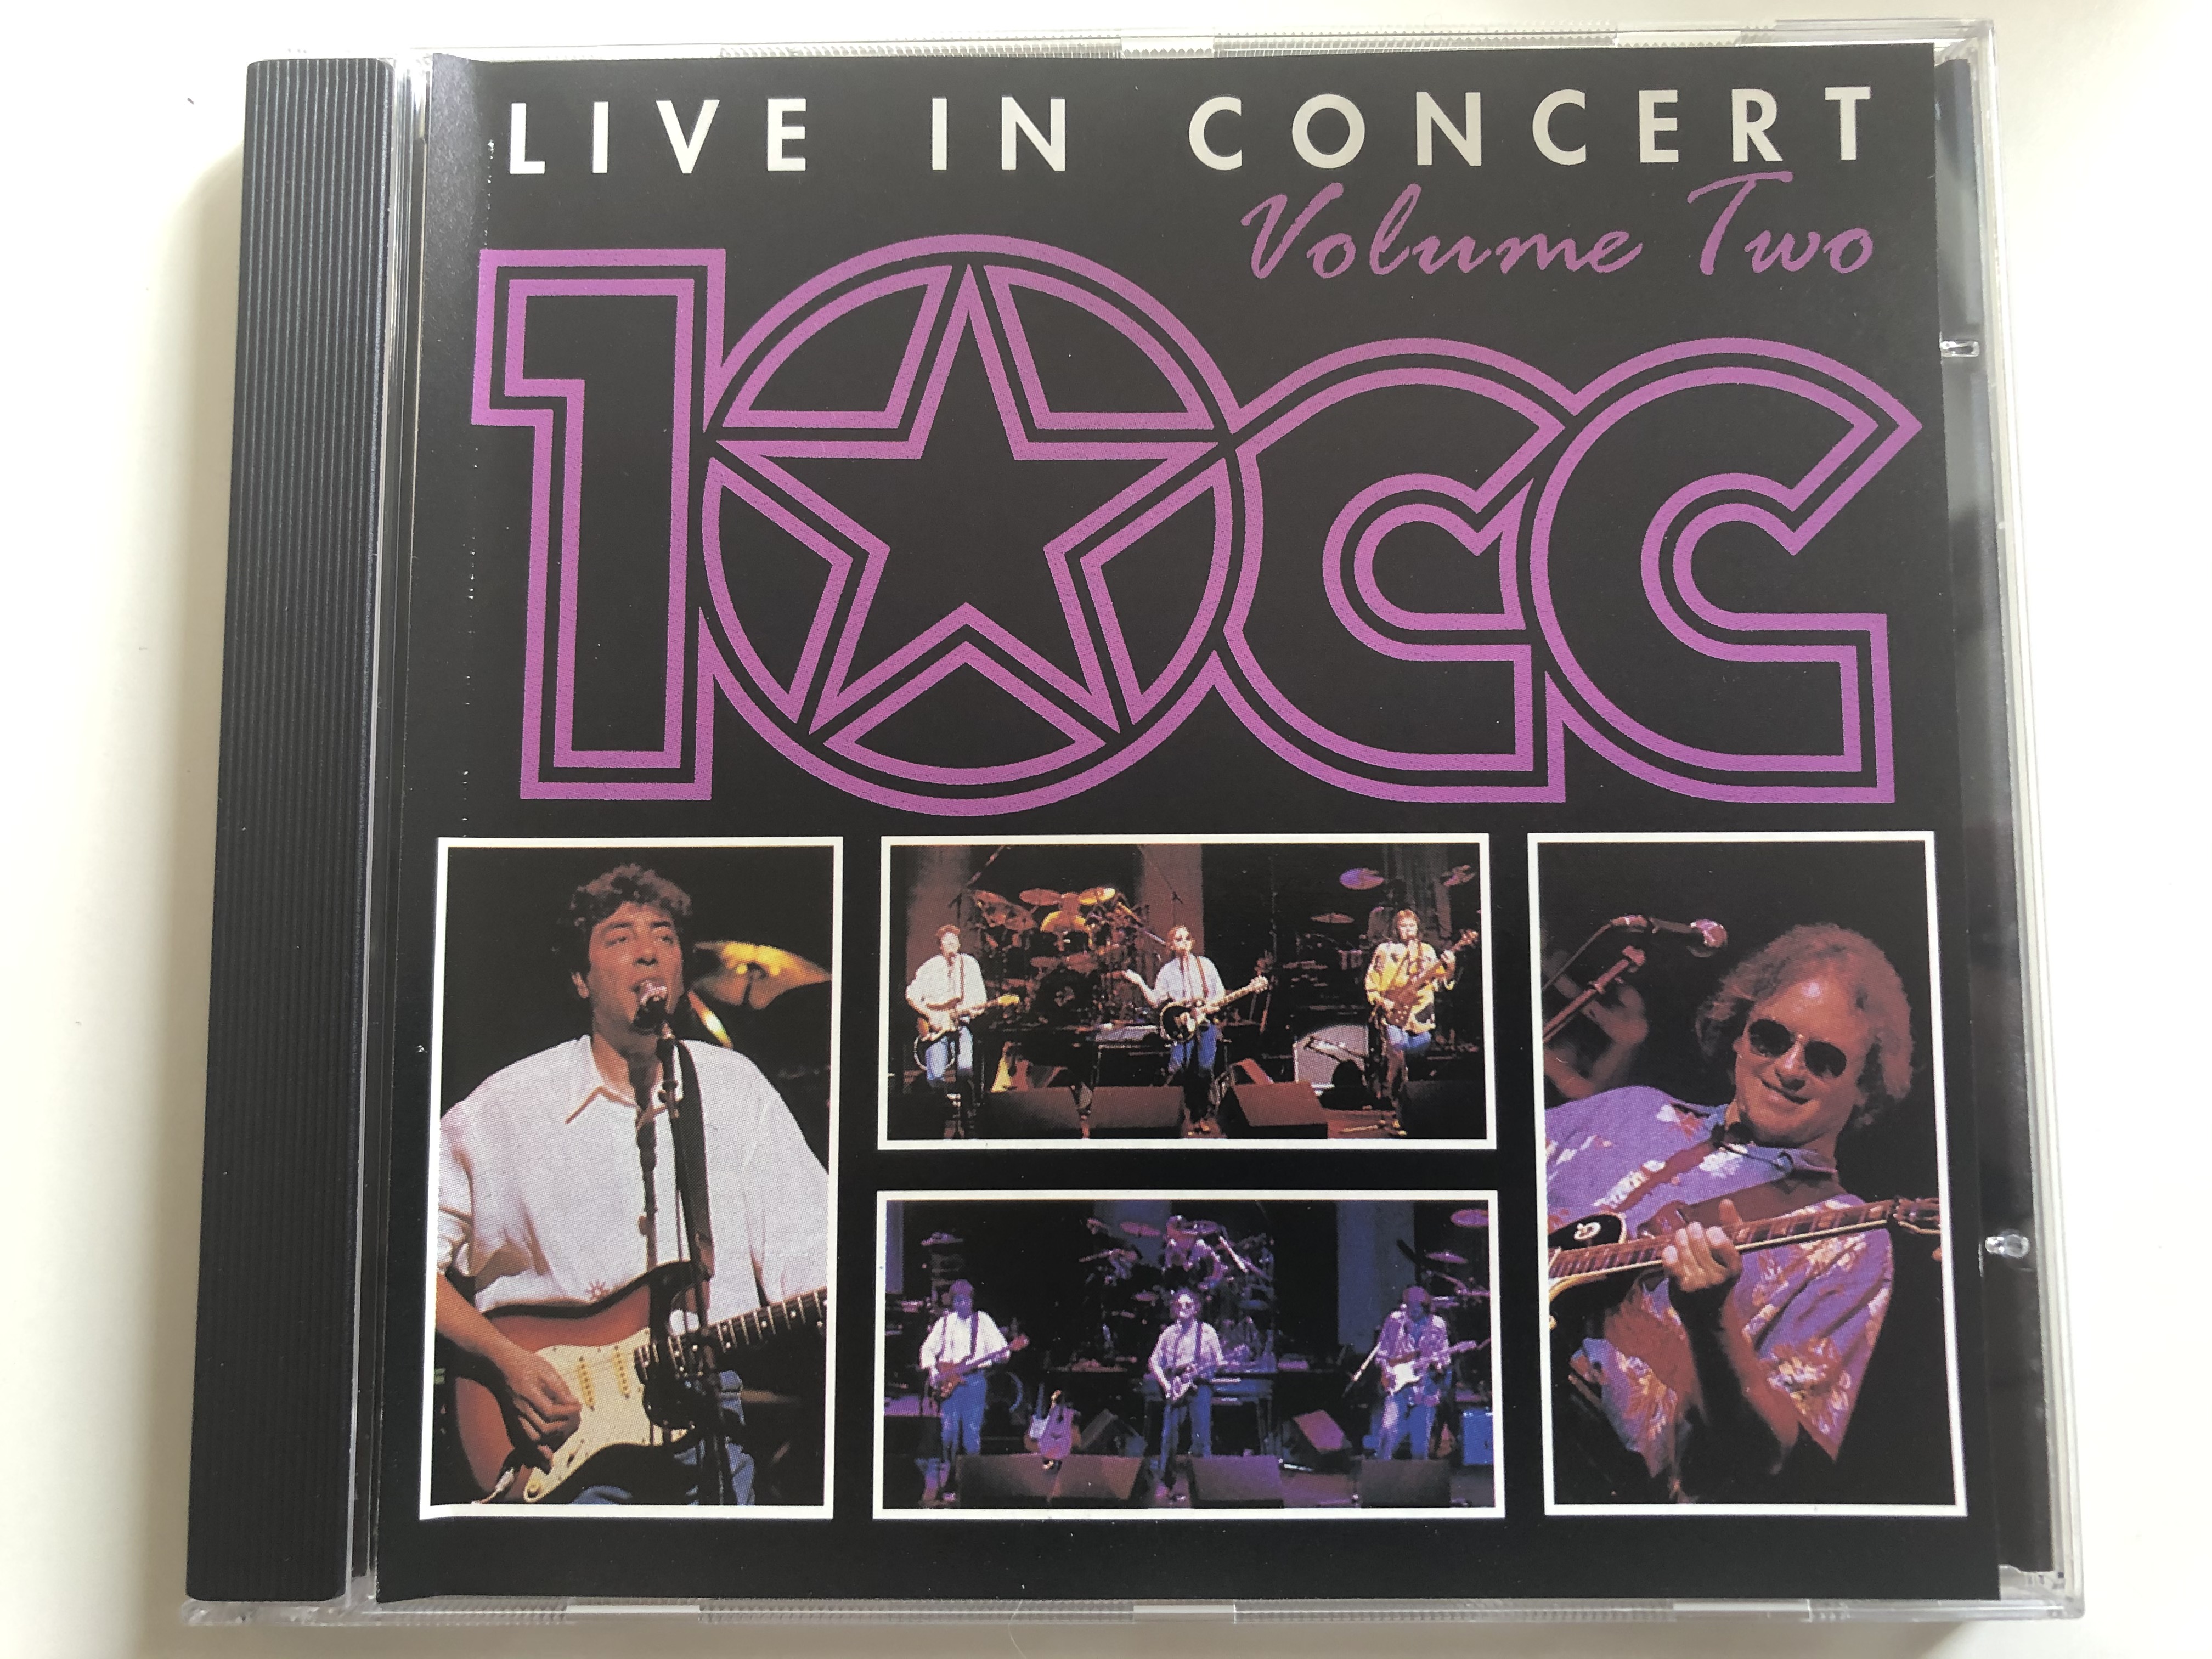 live-in-concert-volume-two-10cc-tring-audio-cd-1993-jhd138-1-.jpg